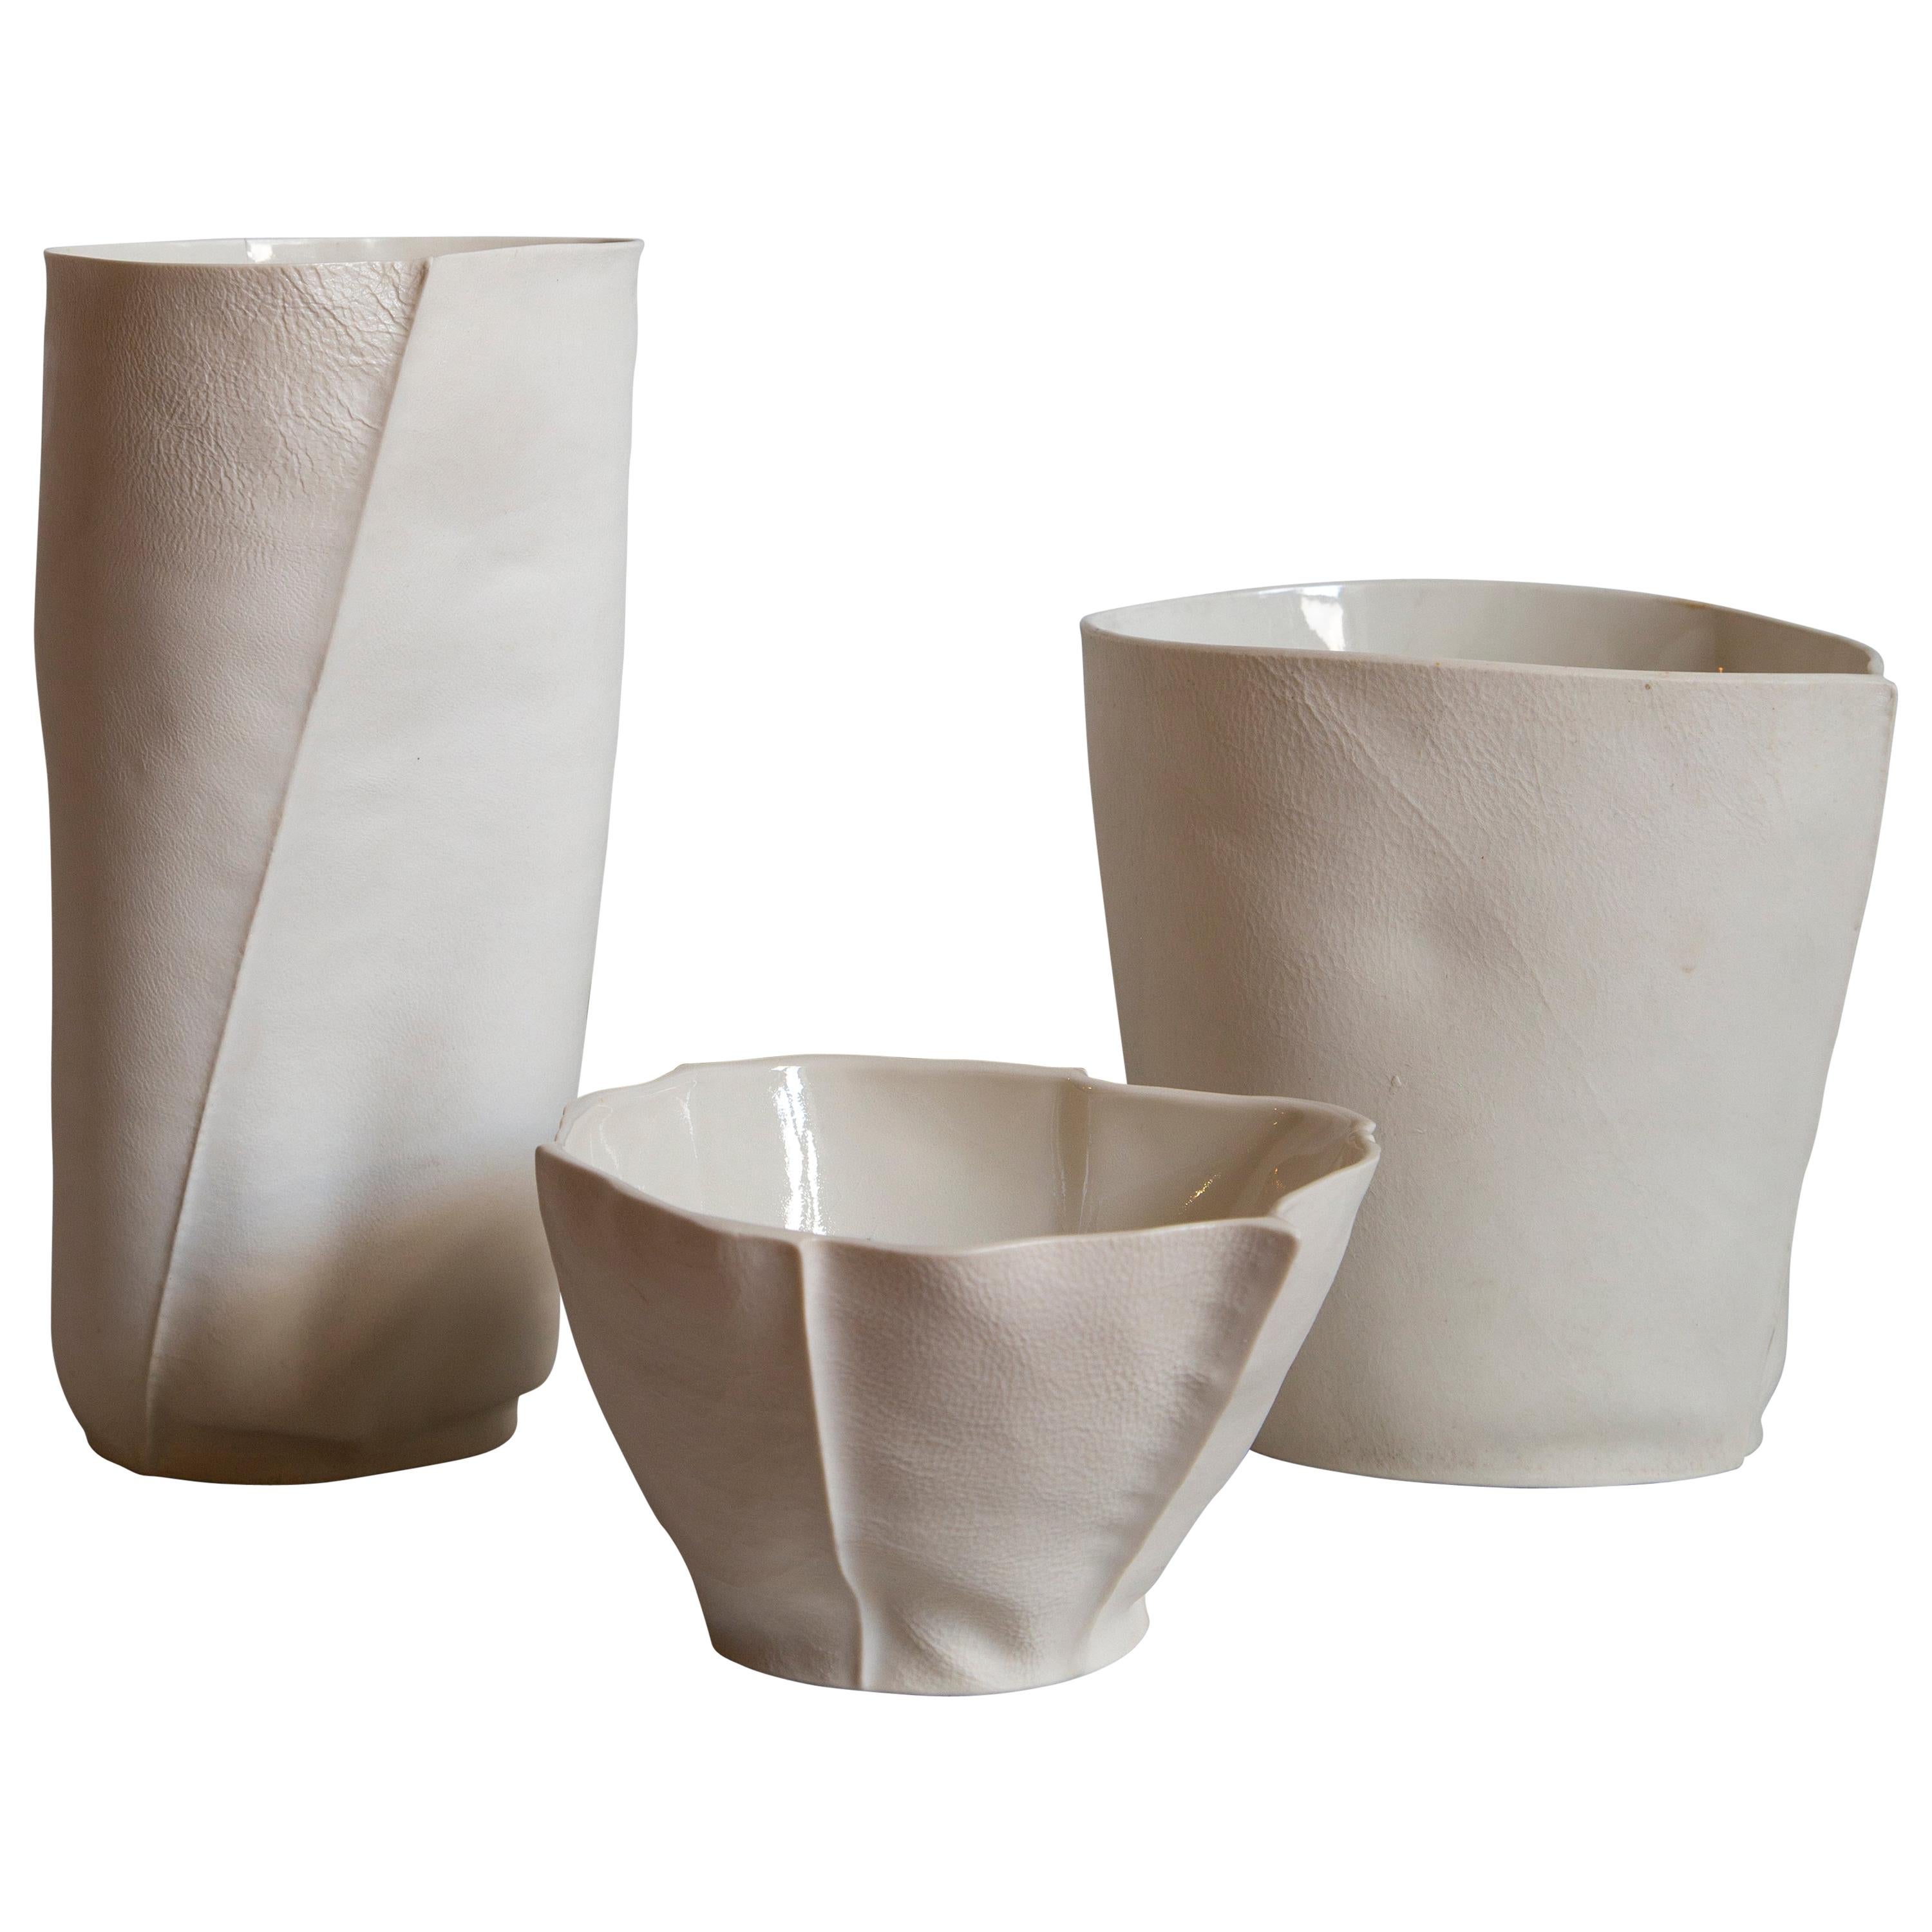 Set of Three Unique Kawa Pieces, Bowl and Vessels, Porcelain, Ceramic, in Stock